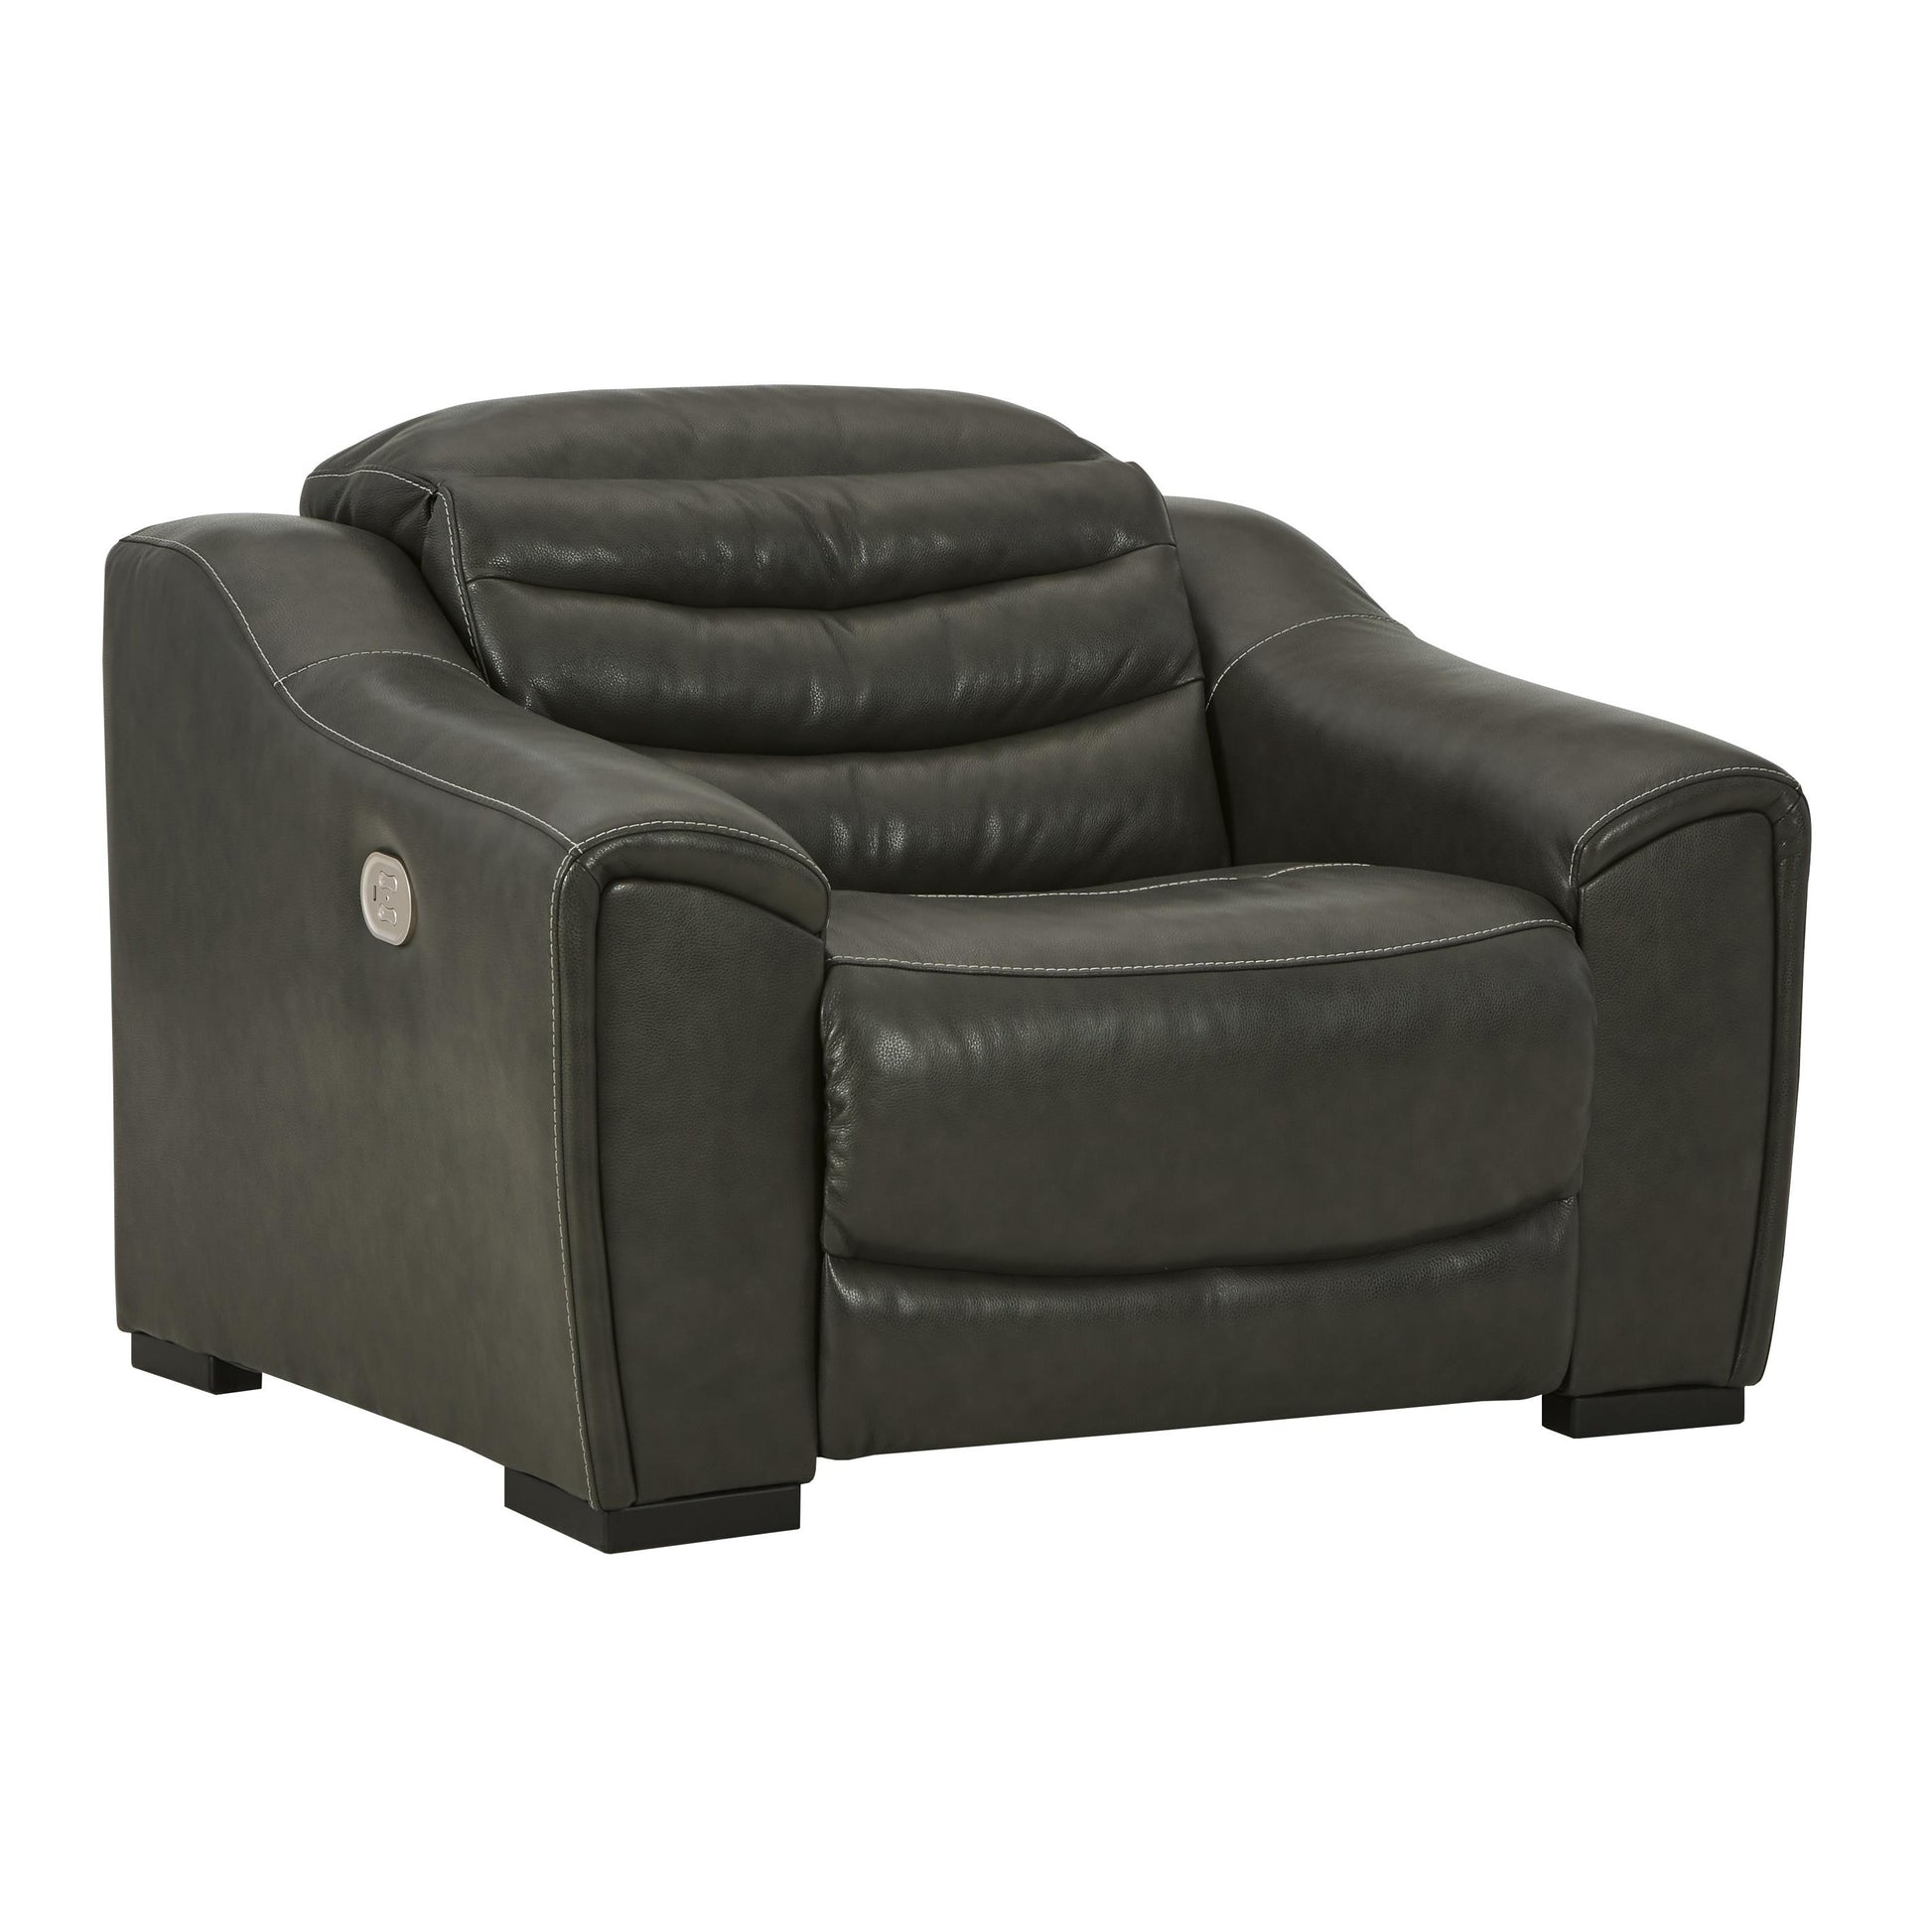 Signature Design by Ashley Center Line Power Leather Match Recliner U6340413 IMAGE 1